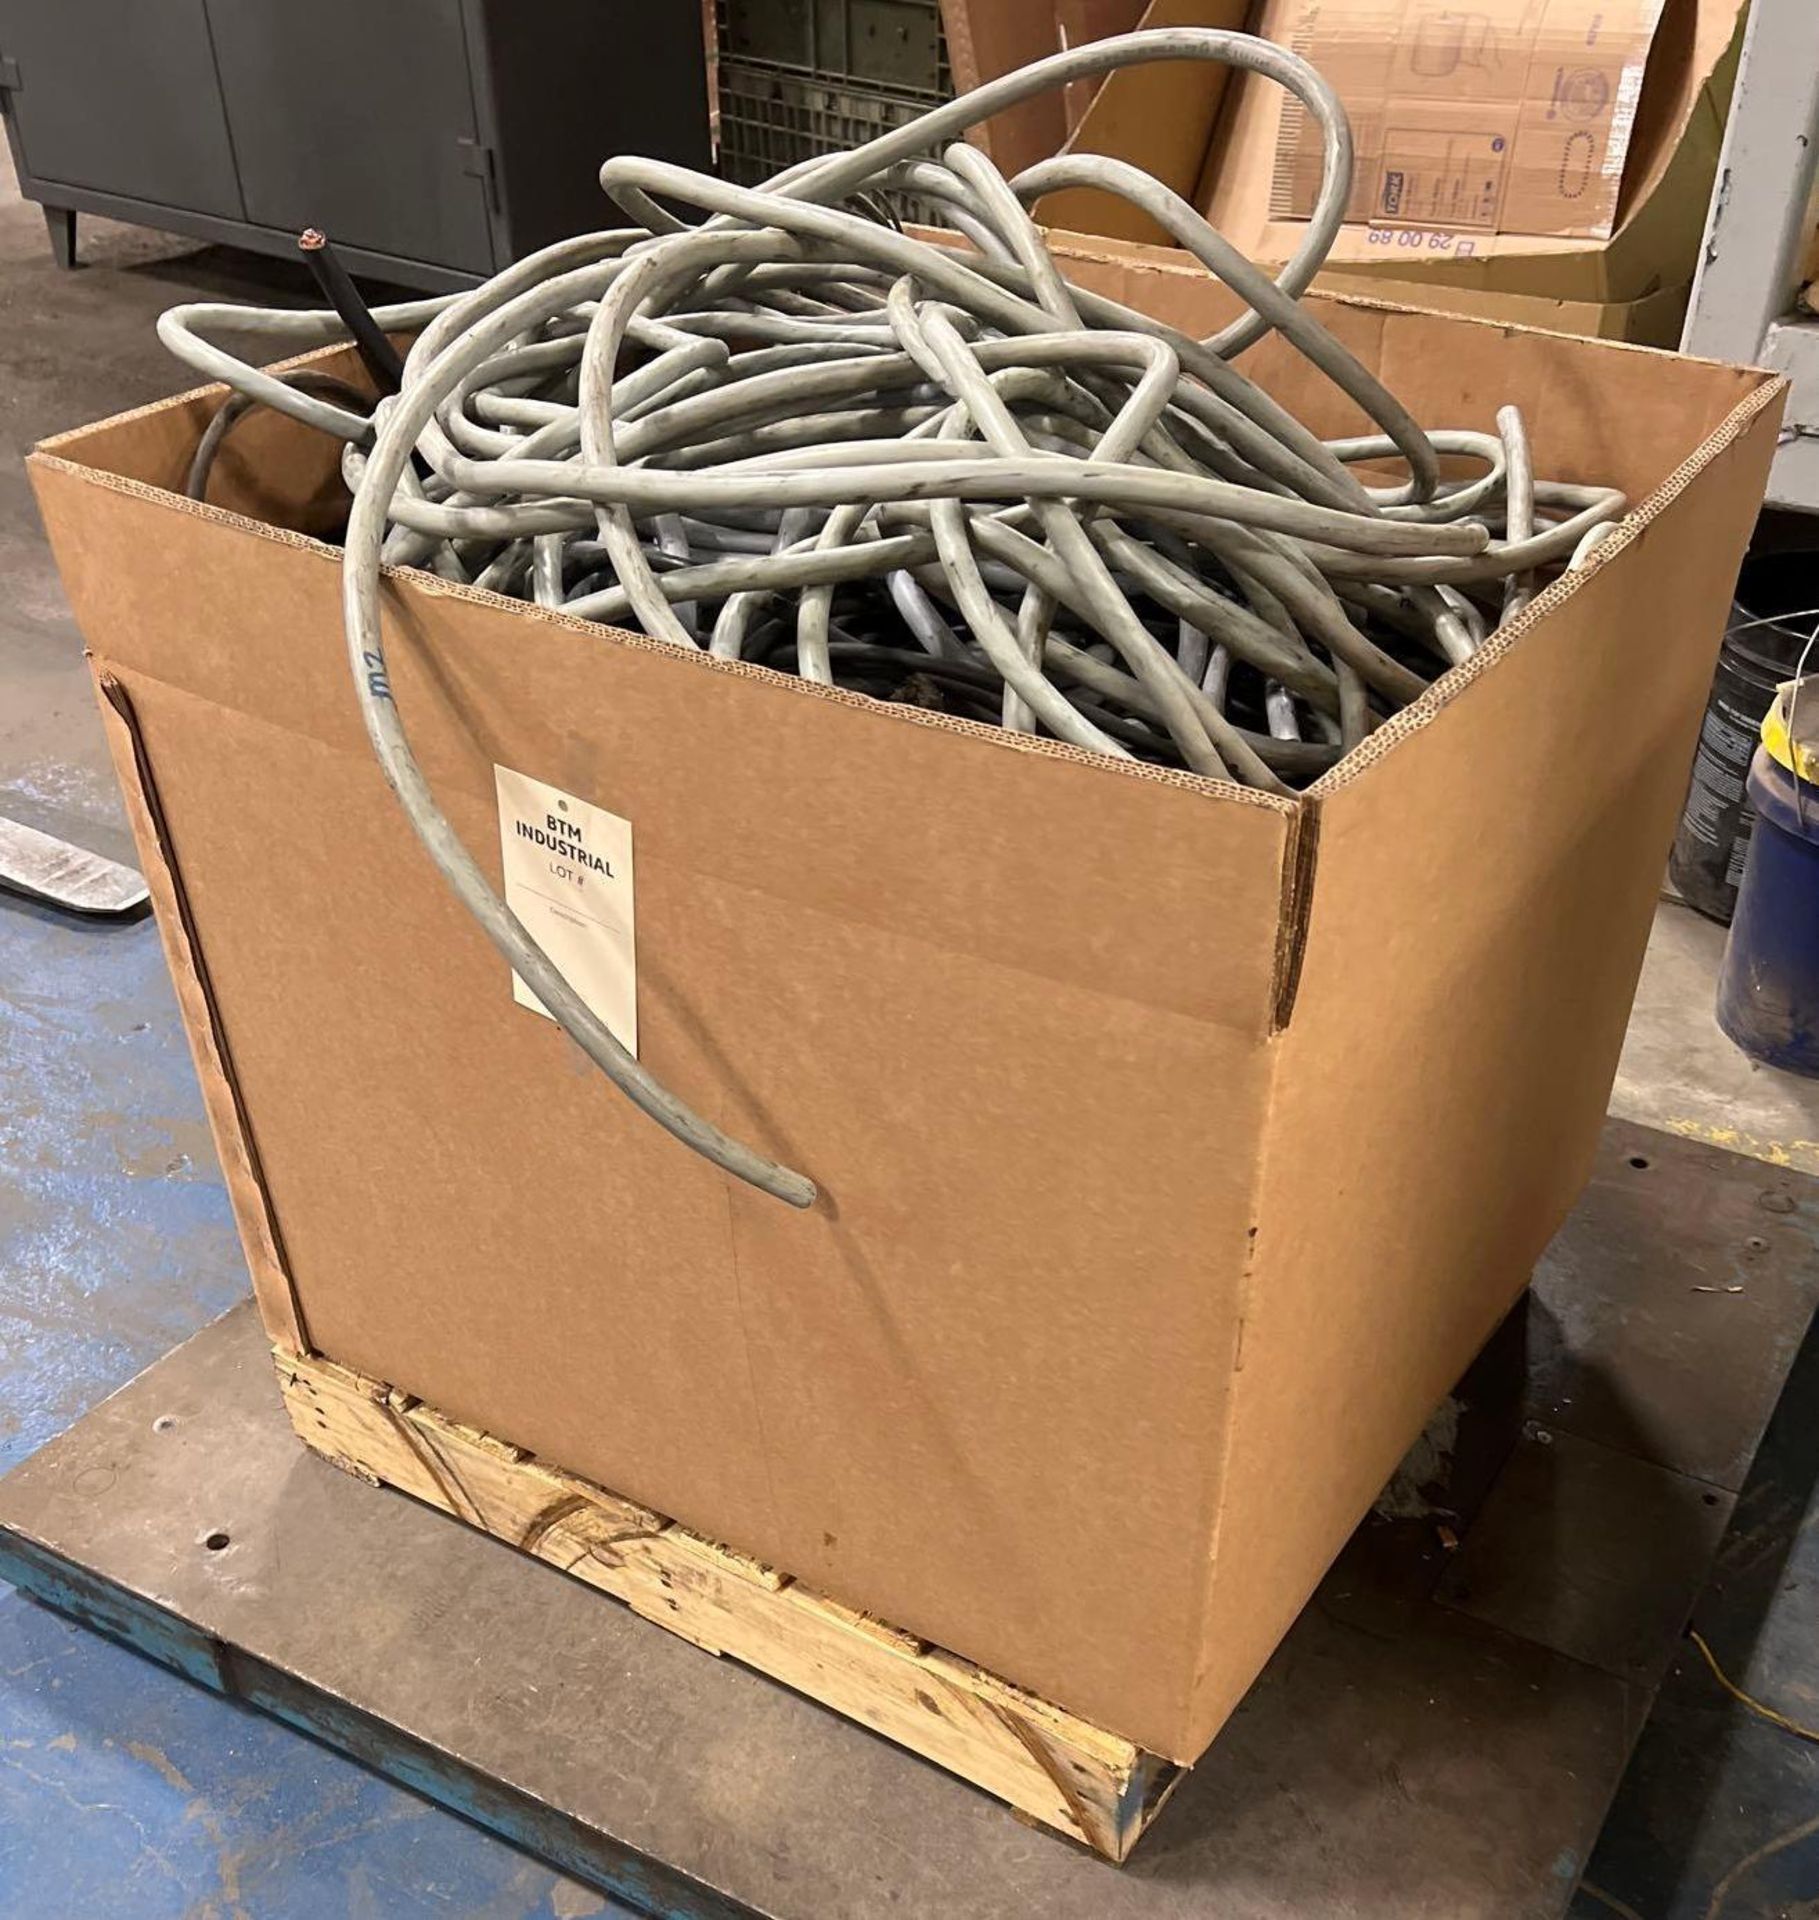 Scrap Wire (Insulated) 309 Lbs. (Includes Tare Weight) - Image 6 of 6